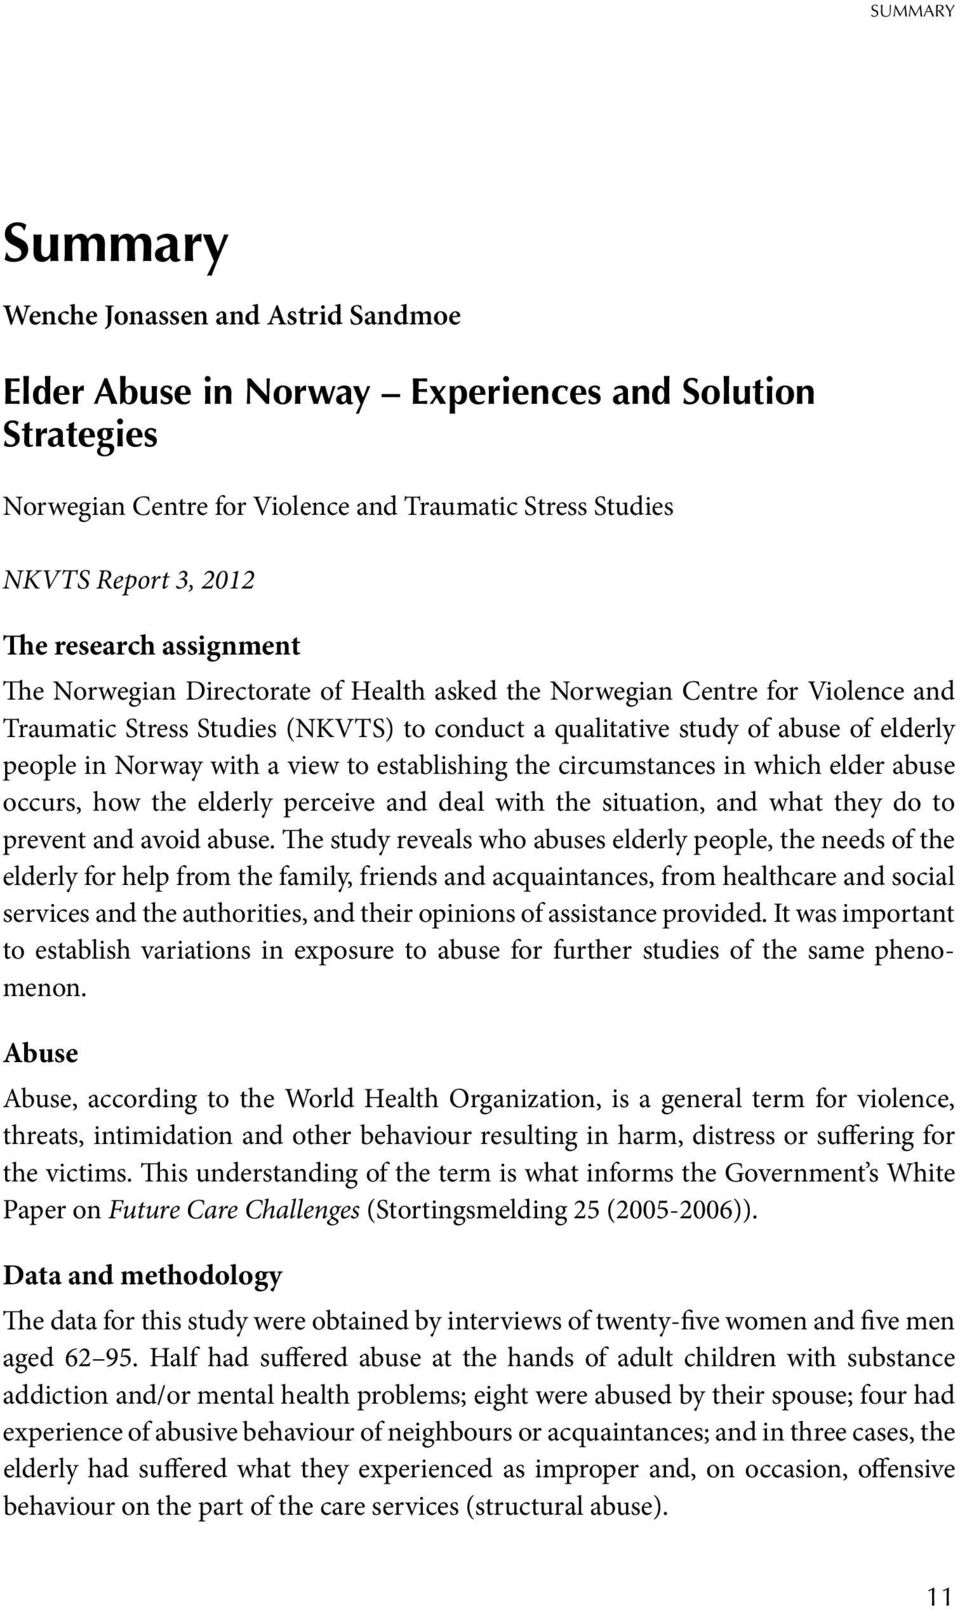 Norway with a view to establishing the circumstances in which elder abuse occurs, how the elderly perceive and deal with the situation, and what they do to prevent and avoid abuse.